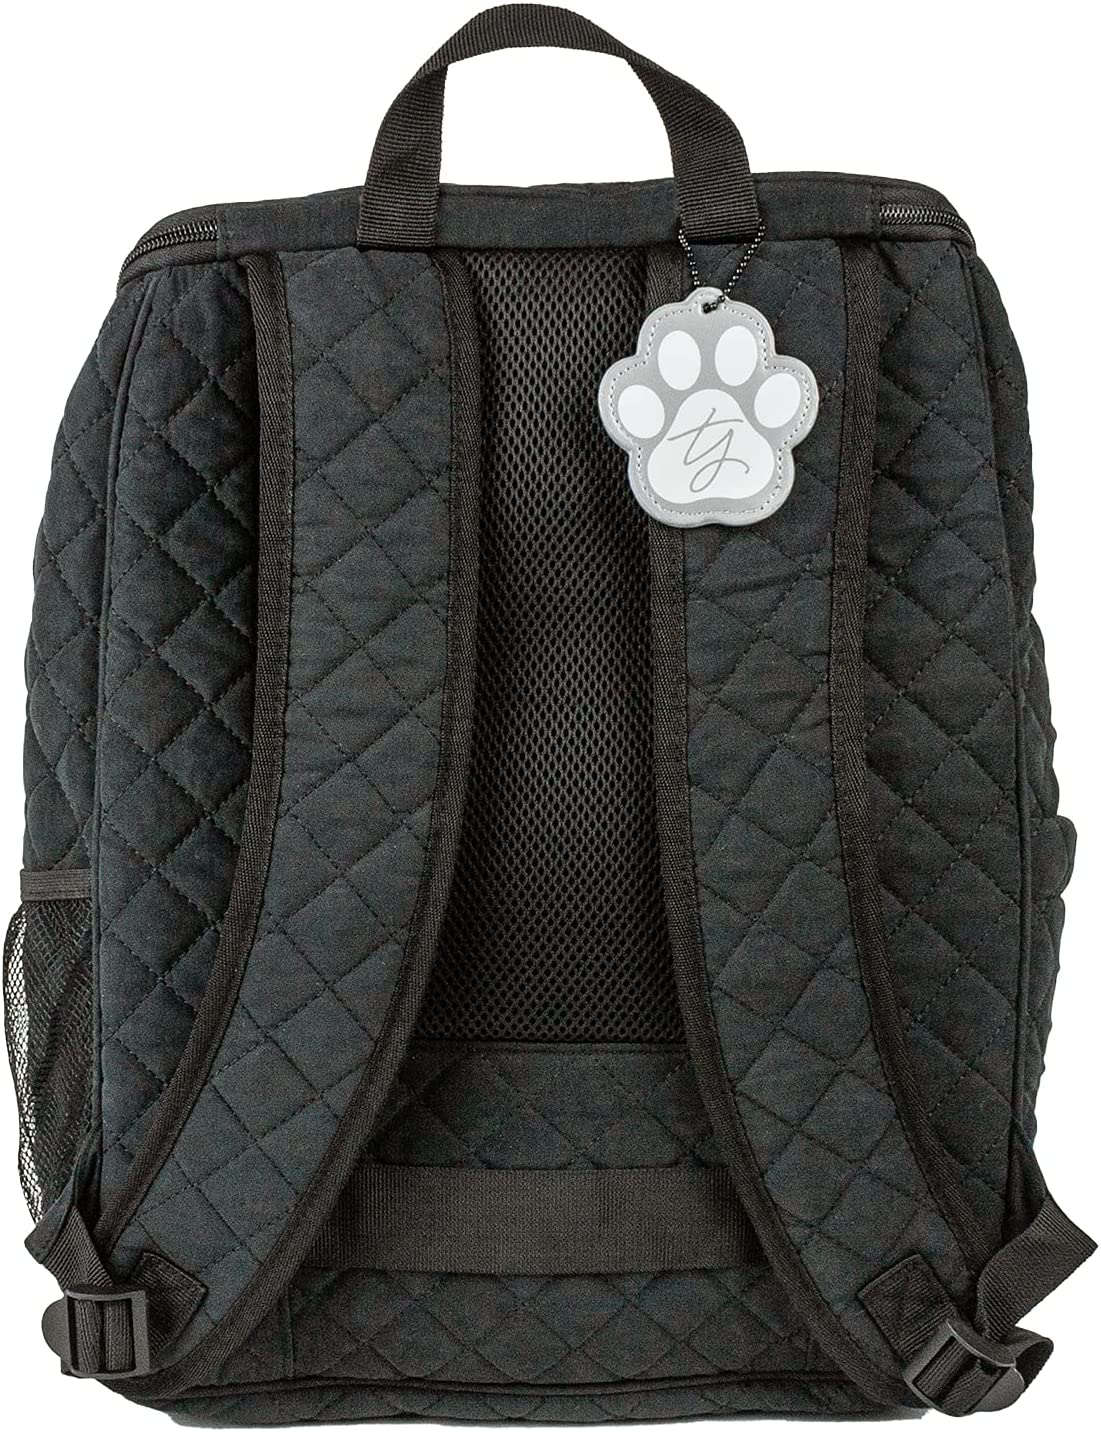 Trisha Yearwood Pet Collection Travel Backpack, Pet Travel Backpack for Supplies, Pet Essentials Backpack, Black